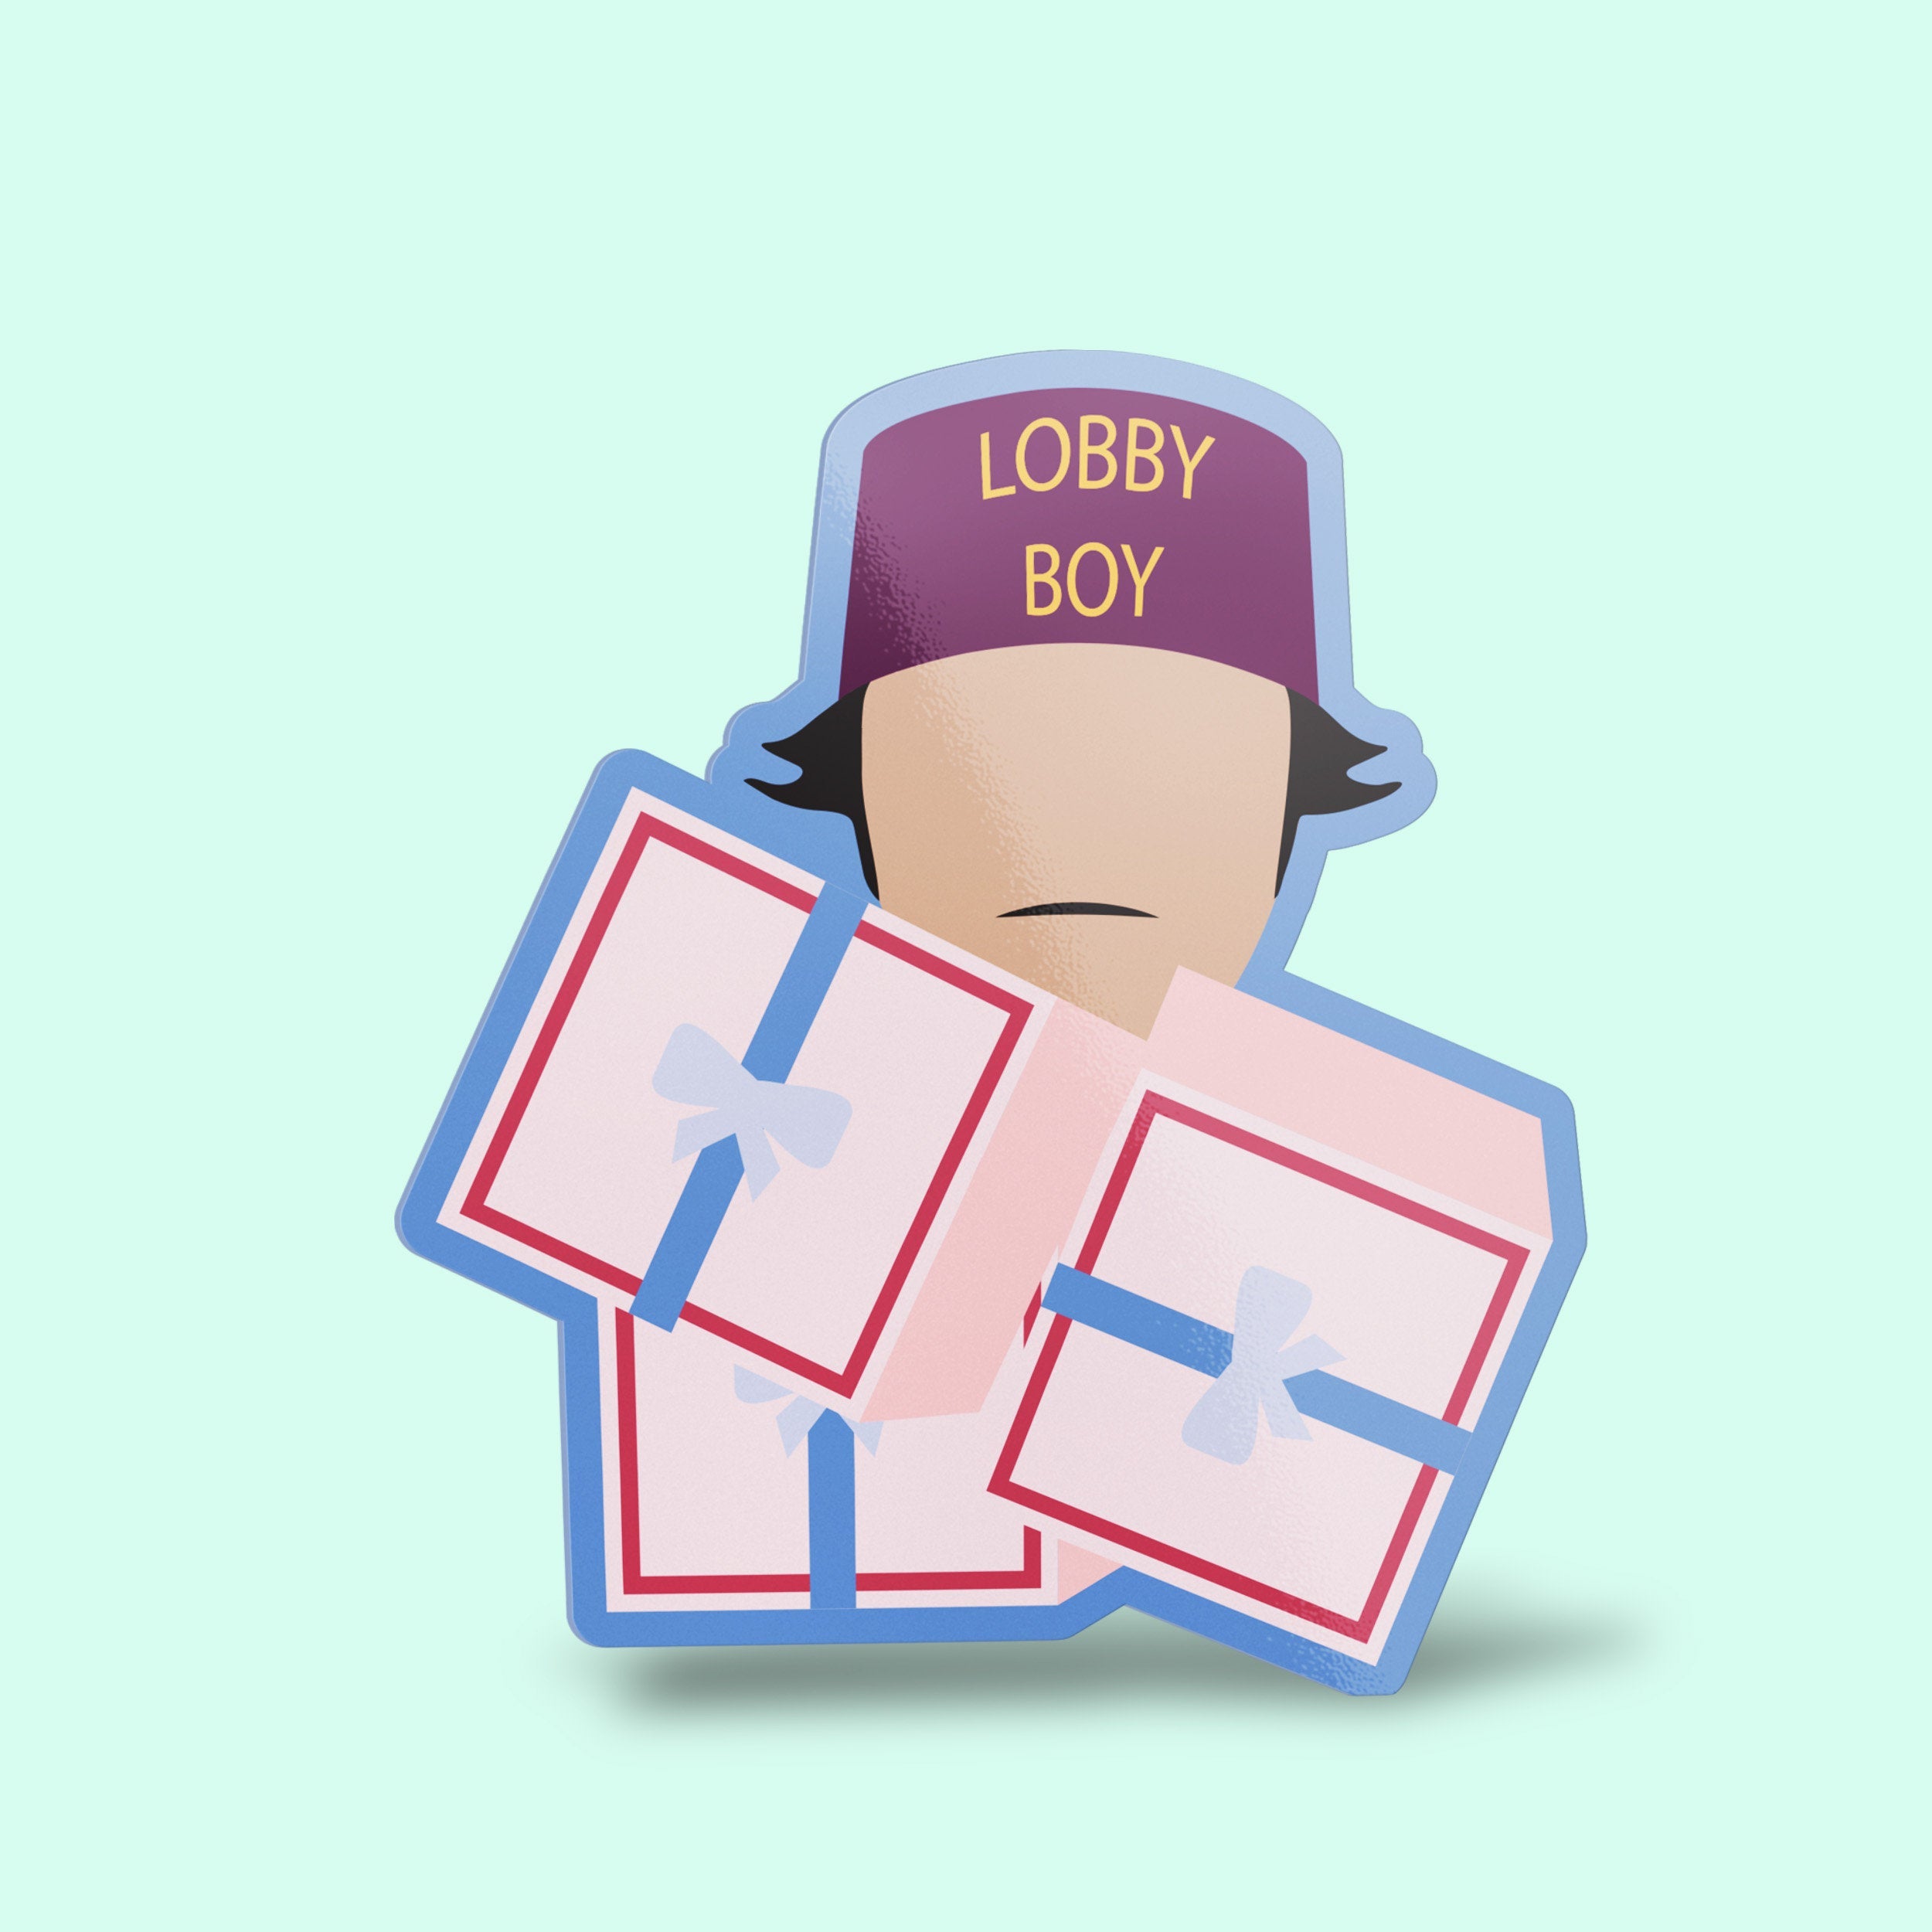 Lobby Boy Premium Vinyl Sticker, The Grand Budapest Hotel Wes Anderson-Inspired Laptop Decal